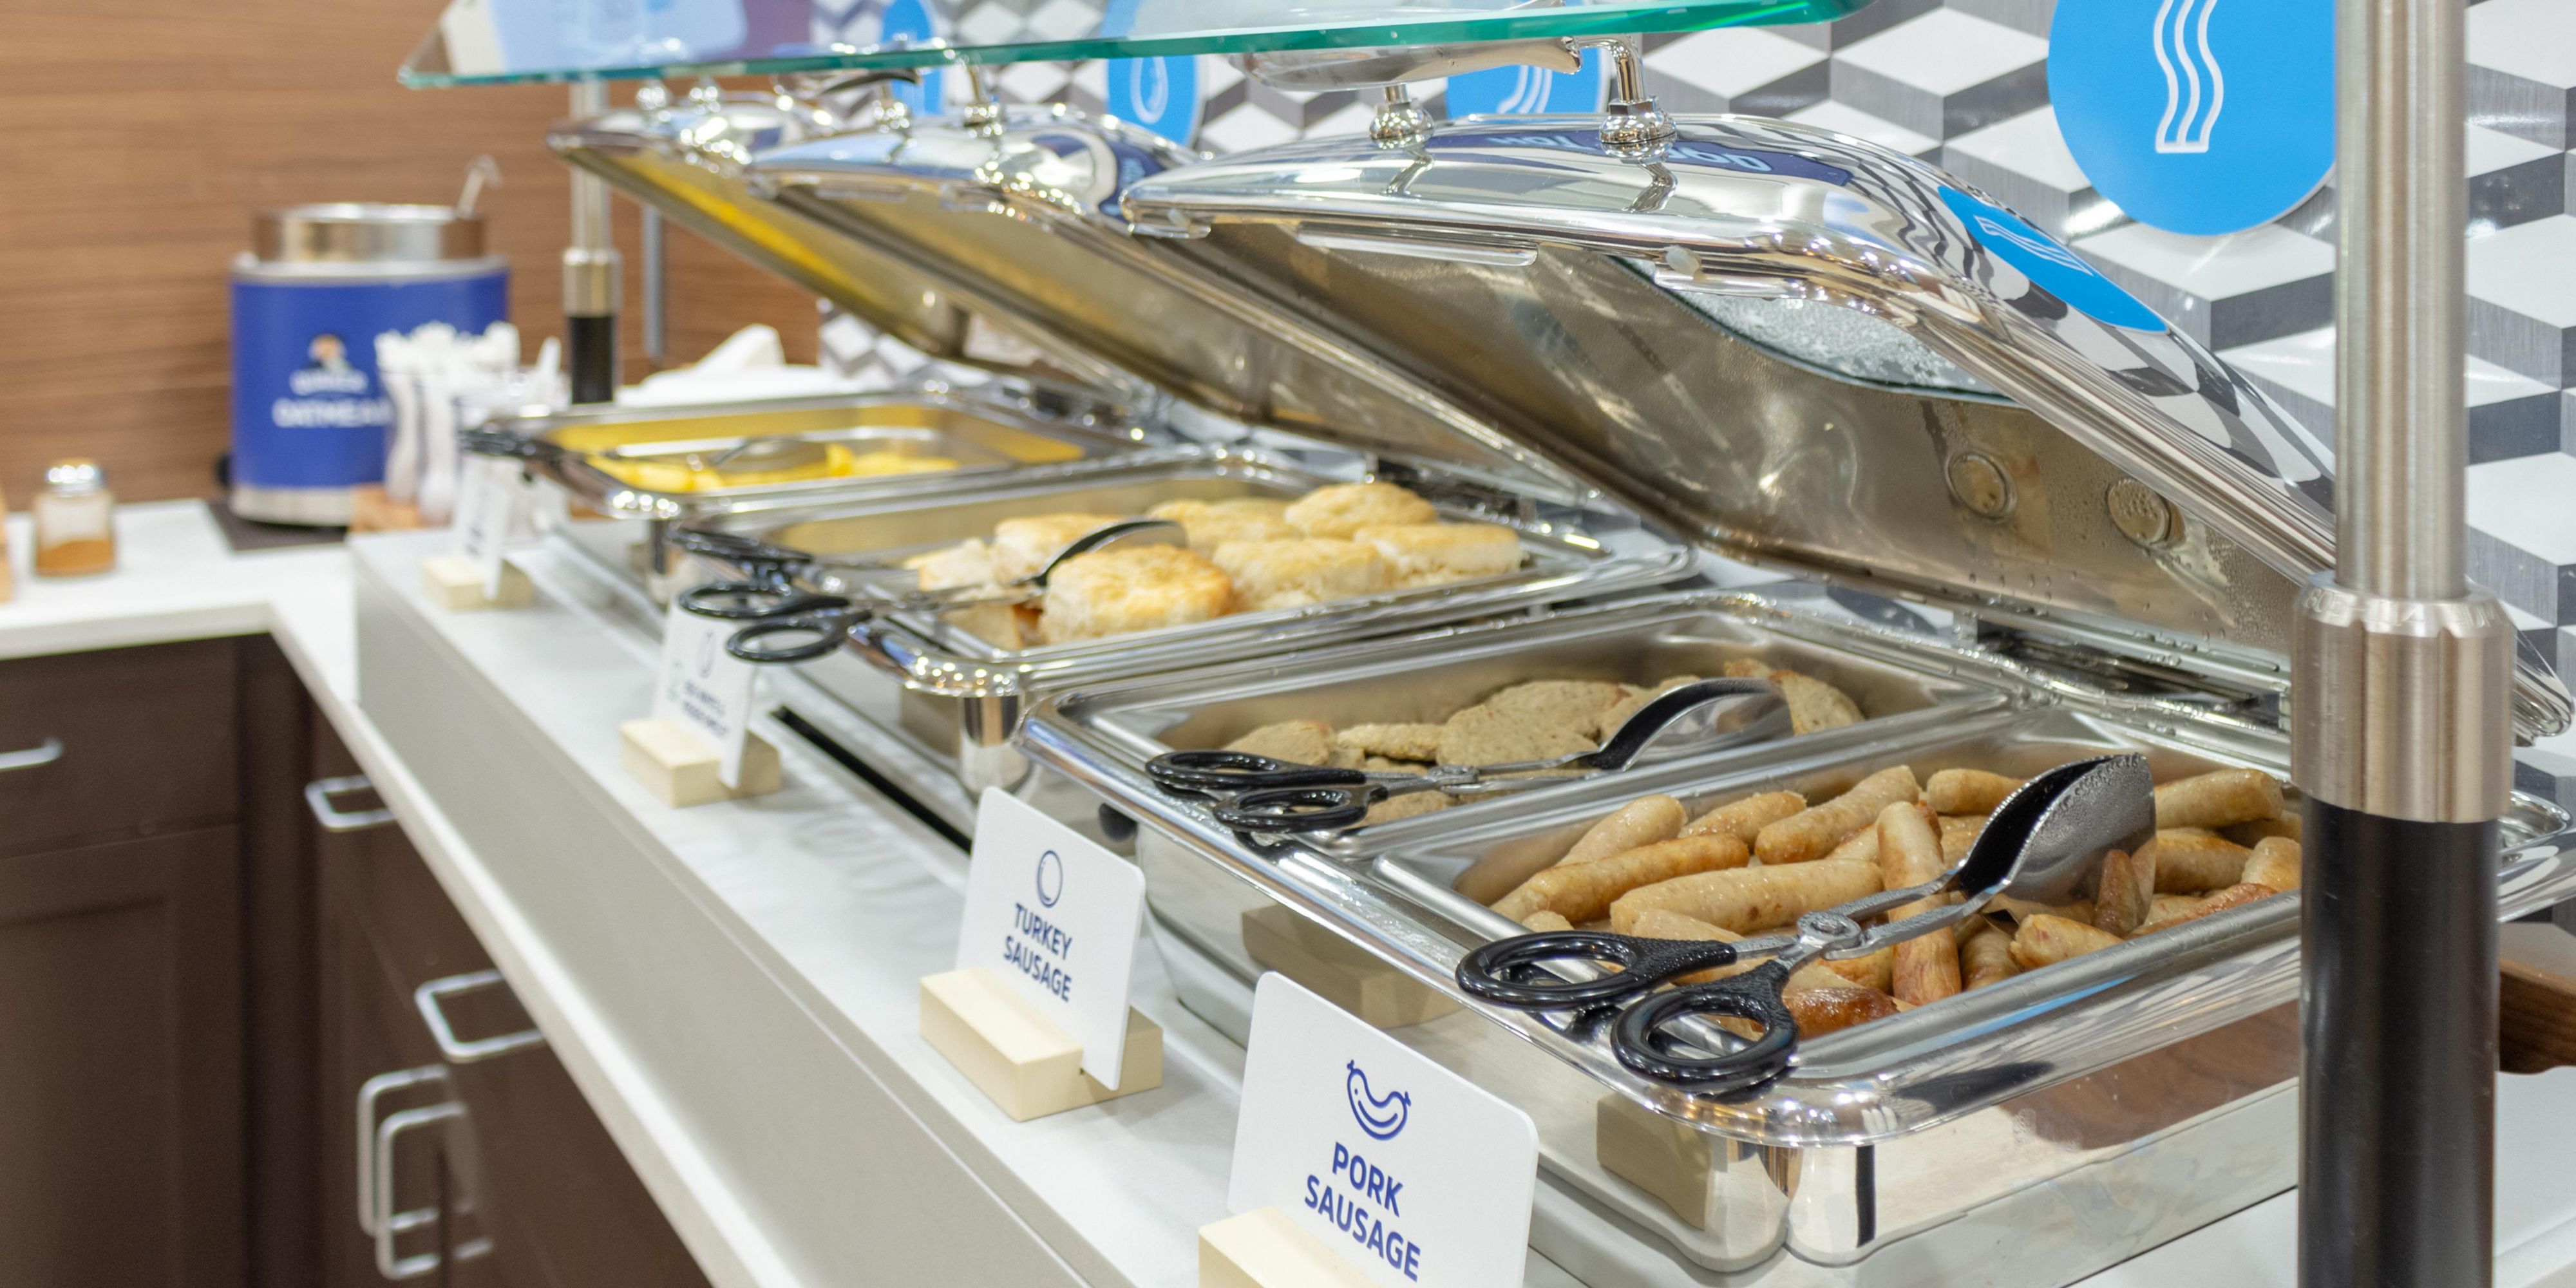 Wake up to our free Express Start Breakfast bar offering a full range of breakfast items including egg white omelets, bacon, sausage, Chobani yogurt, gluten free muffins, whole wheat English muffins, oatmeal, cereal, fresh fruit and a one-touch pancake machine.